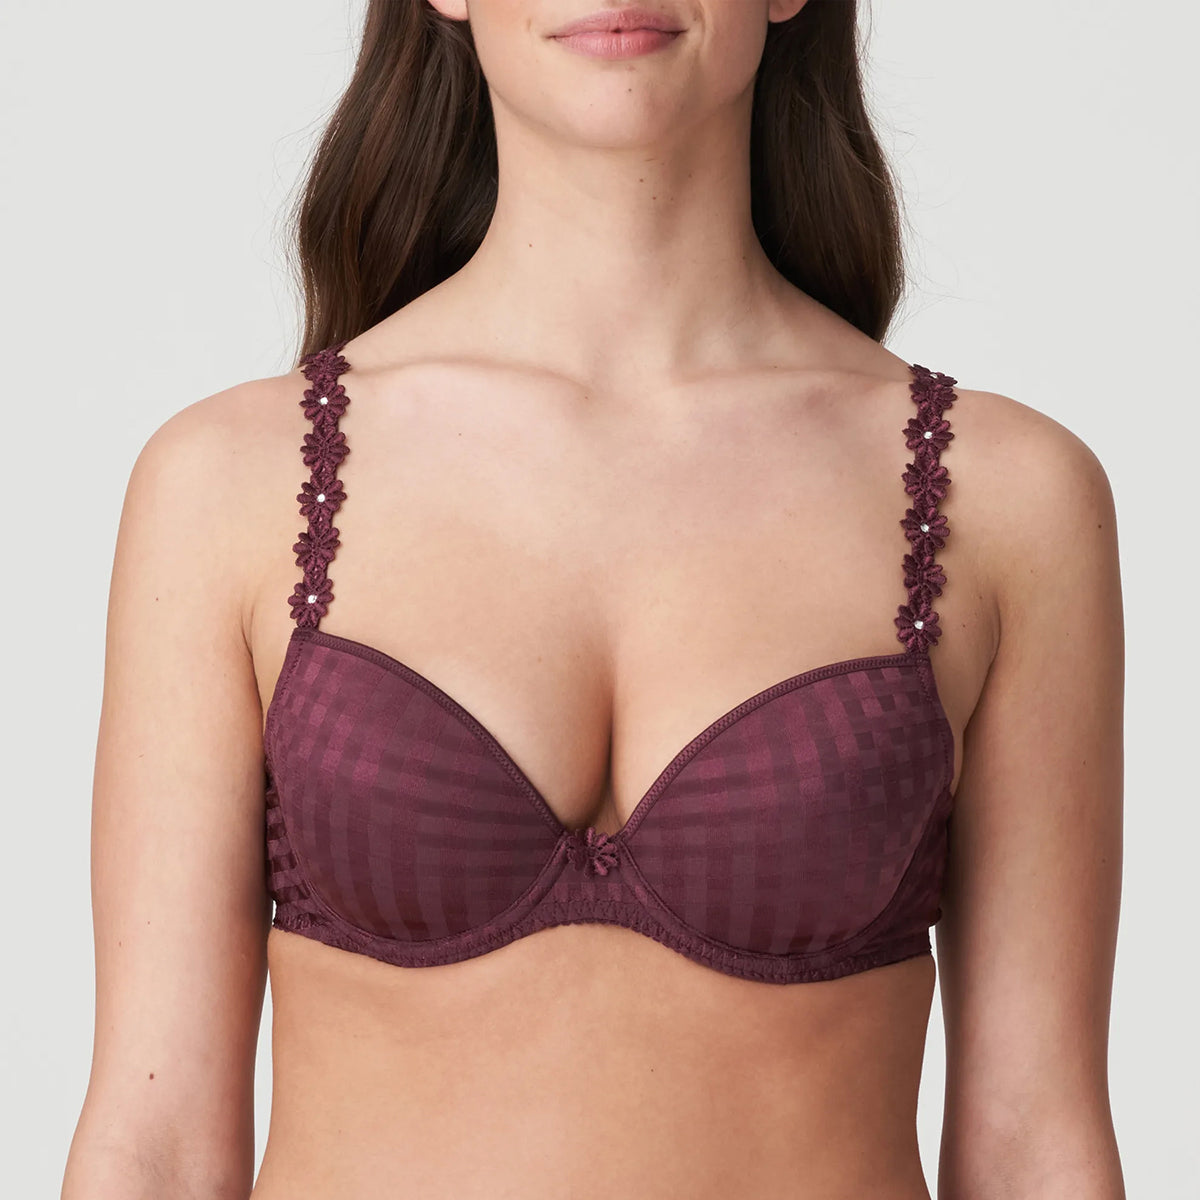 Shop Padded Bras from Leading Designers